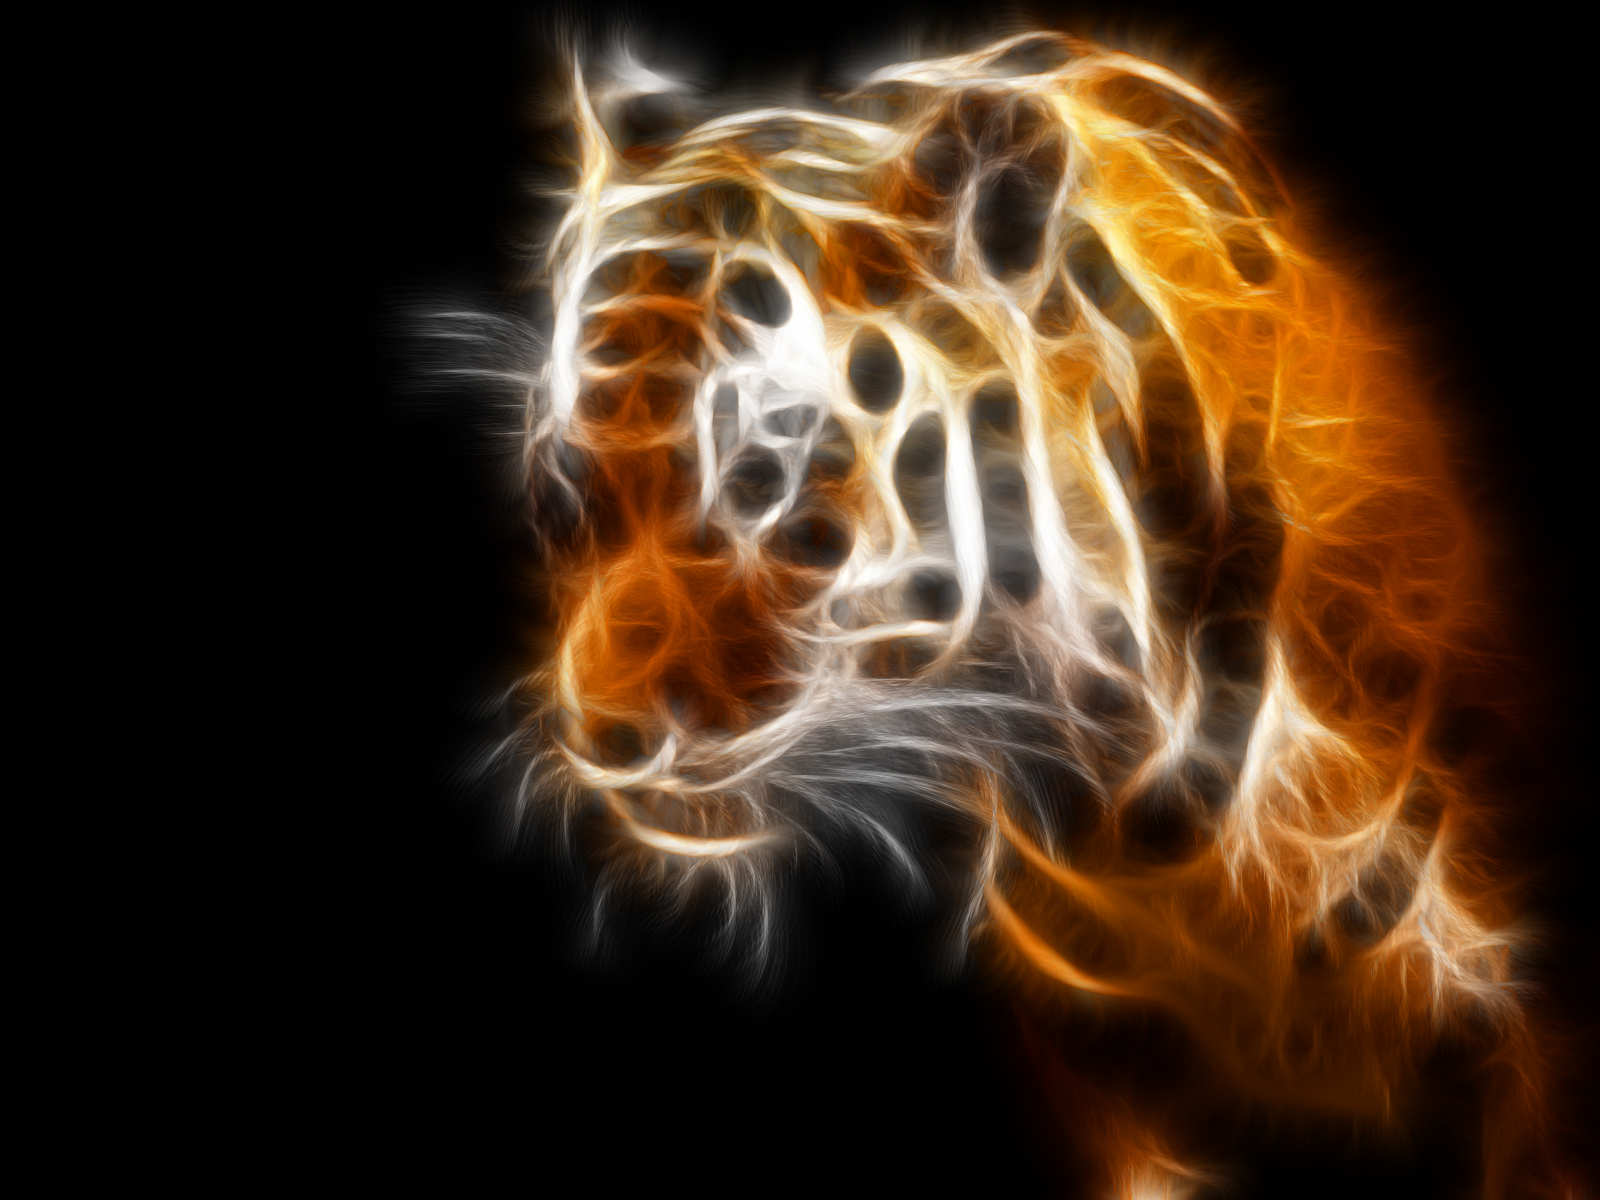 1067 Tiger HD Wallpapers | Backgrounds - Wallpaper Abyss